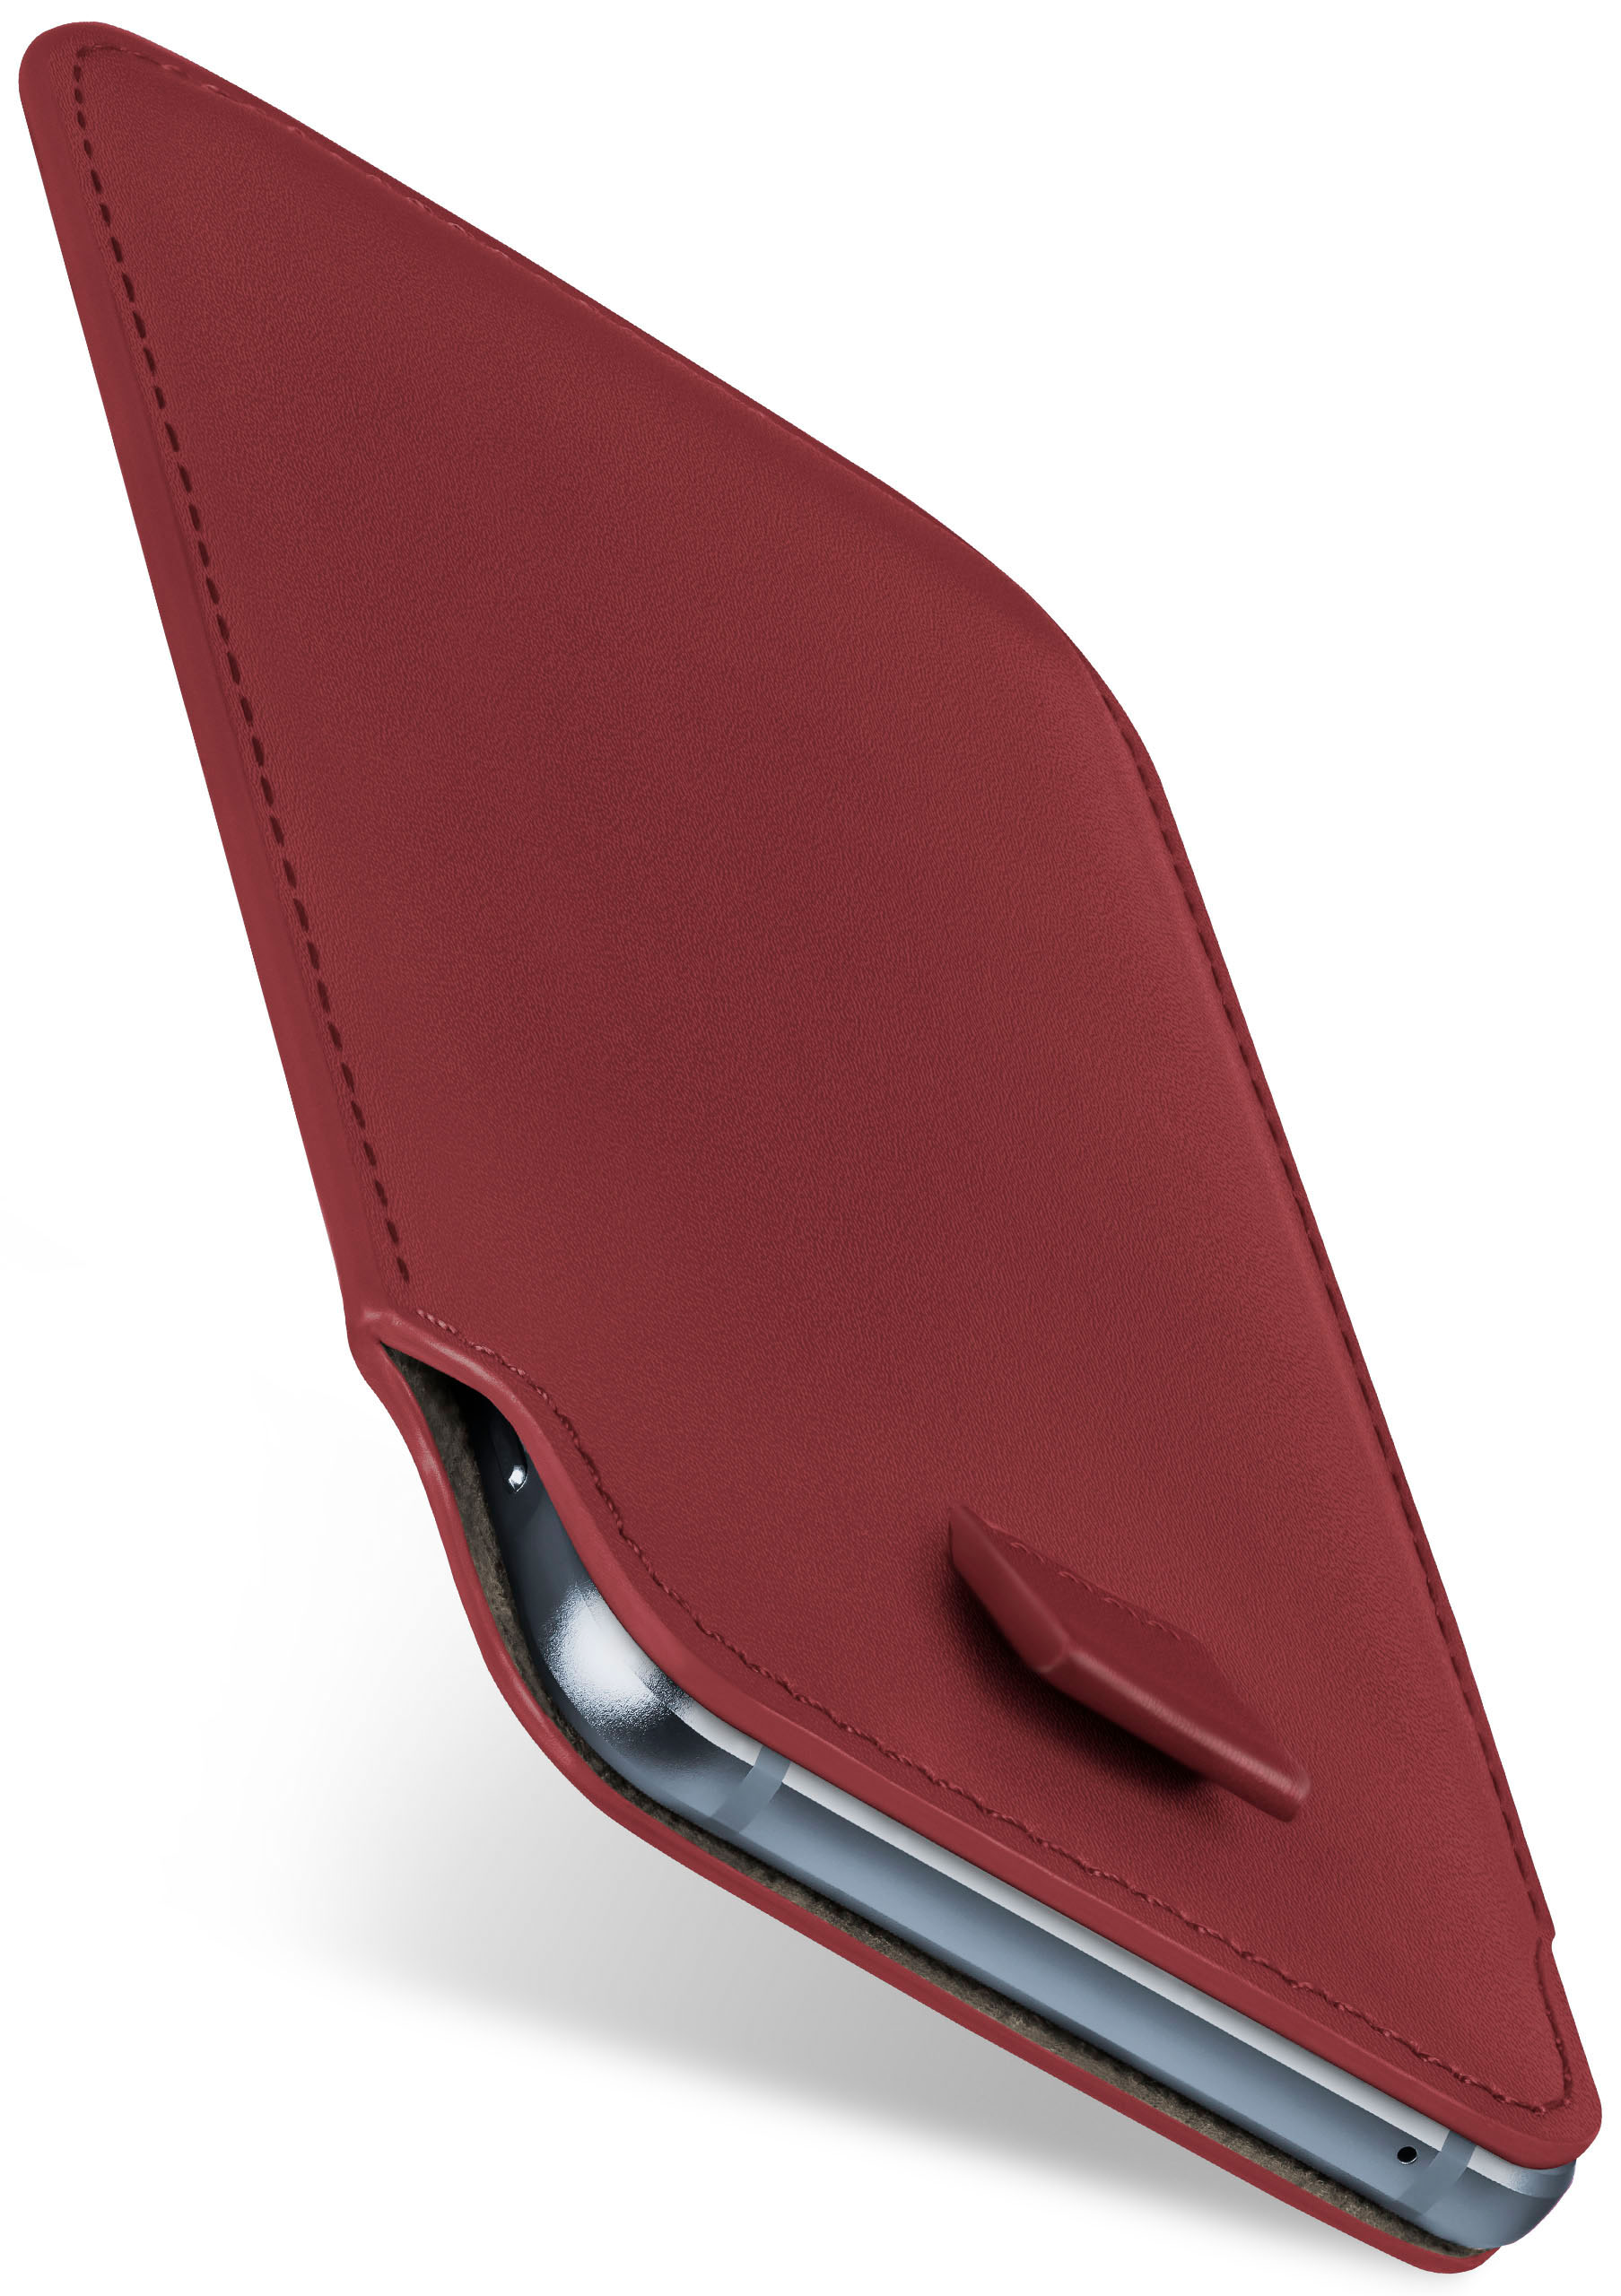 MOEX Slide Case, Full Cover, M7, Maroon-Red One HTC